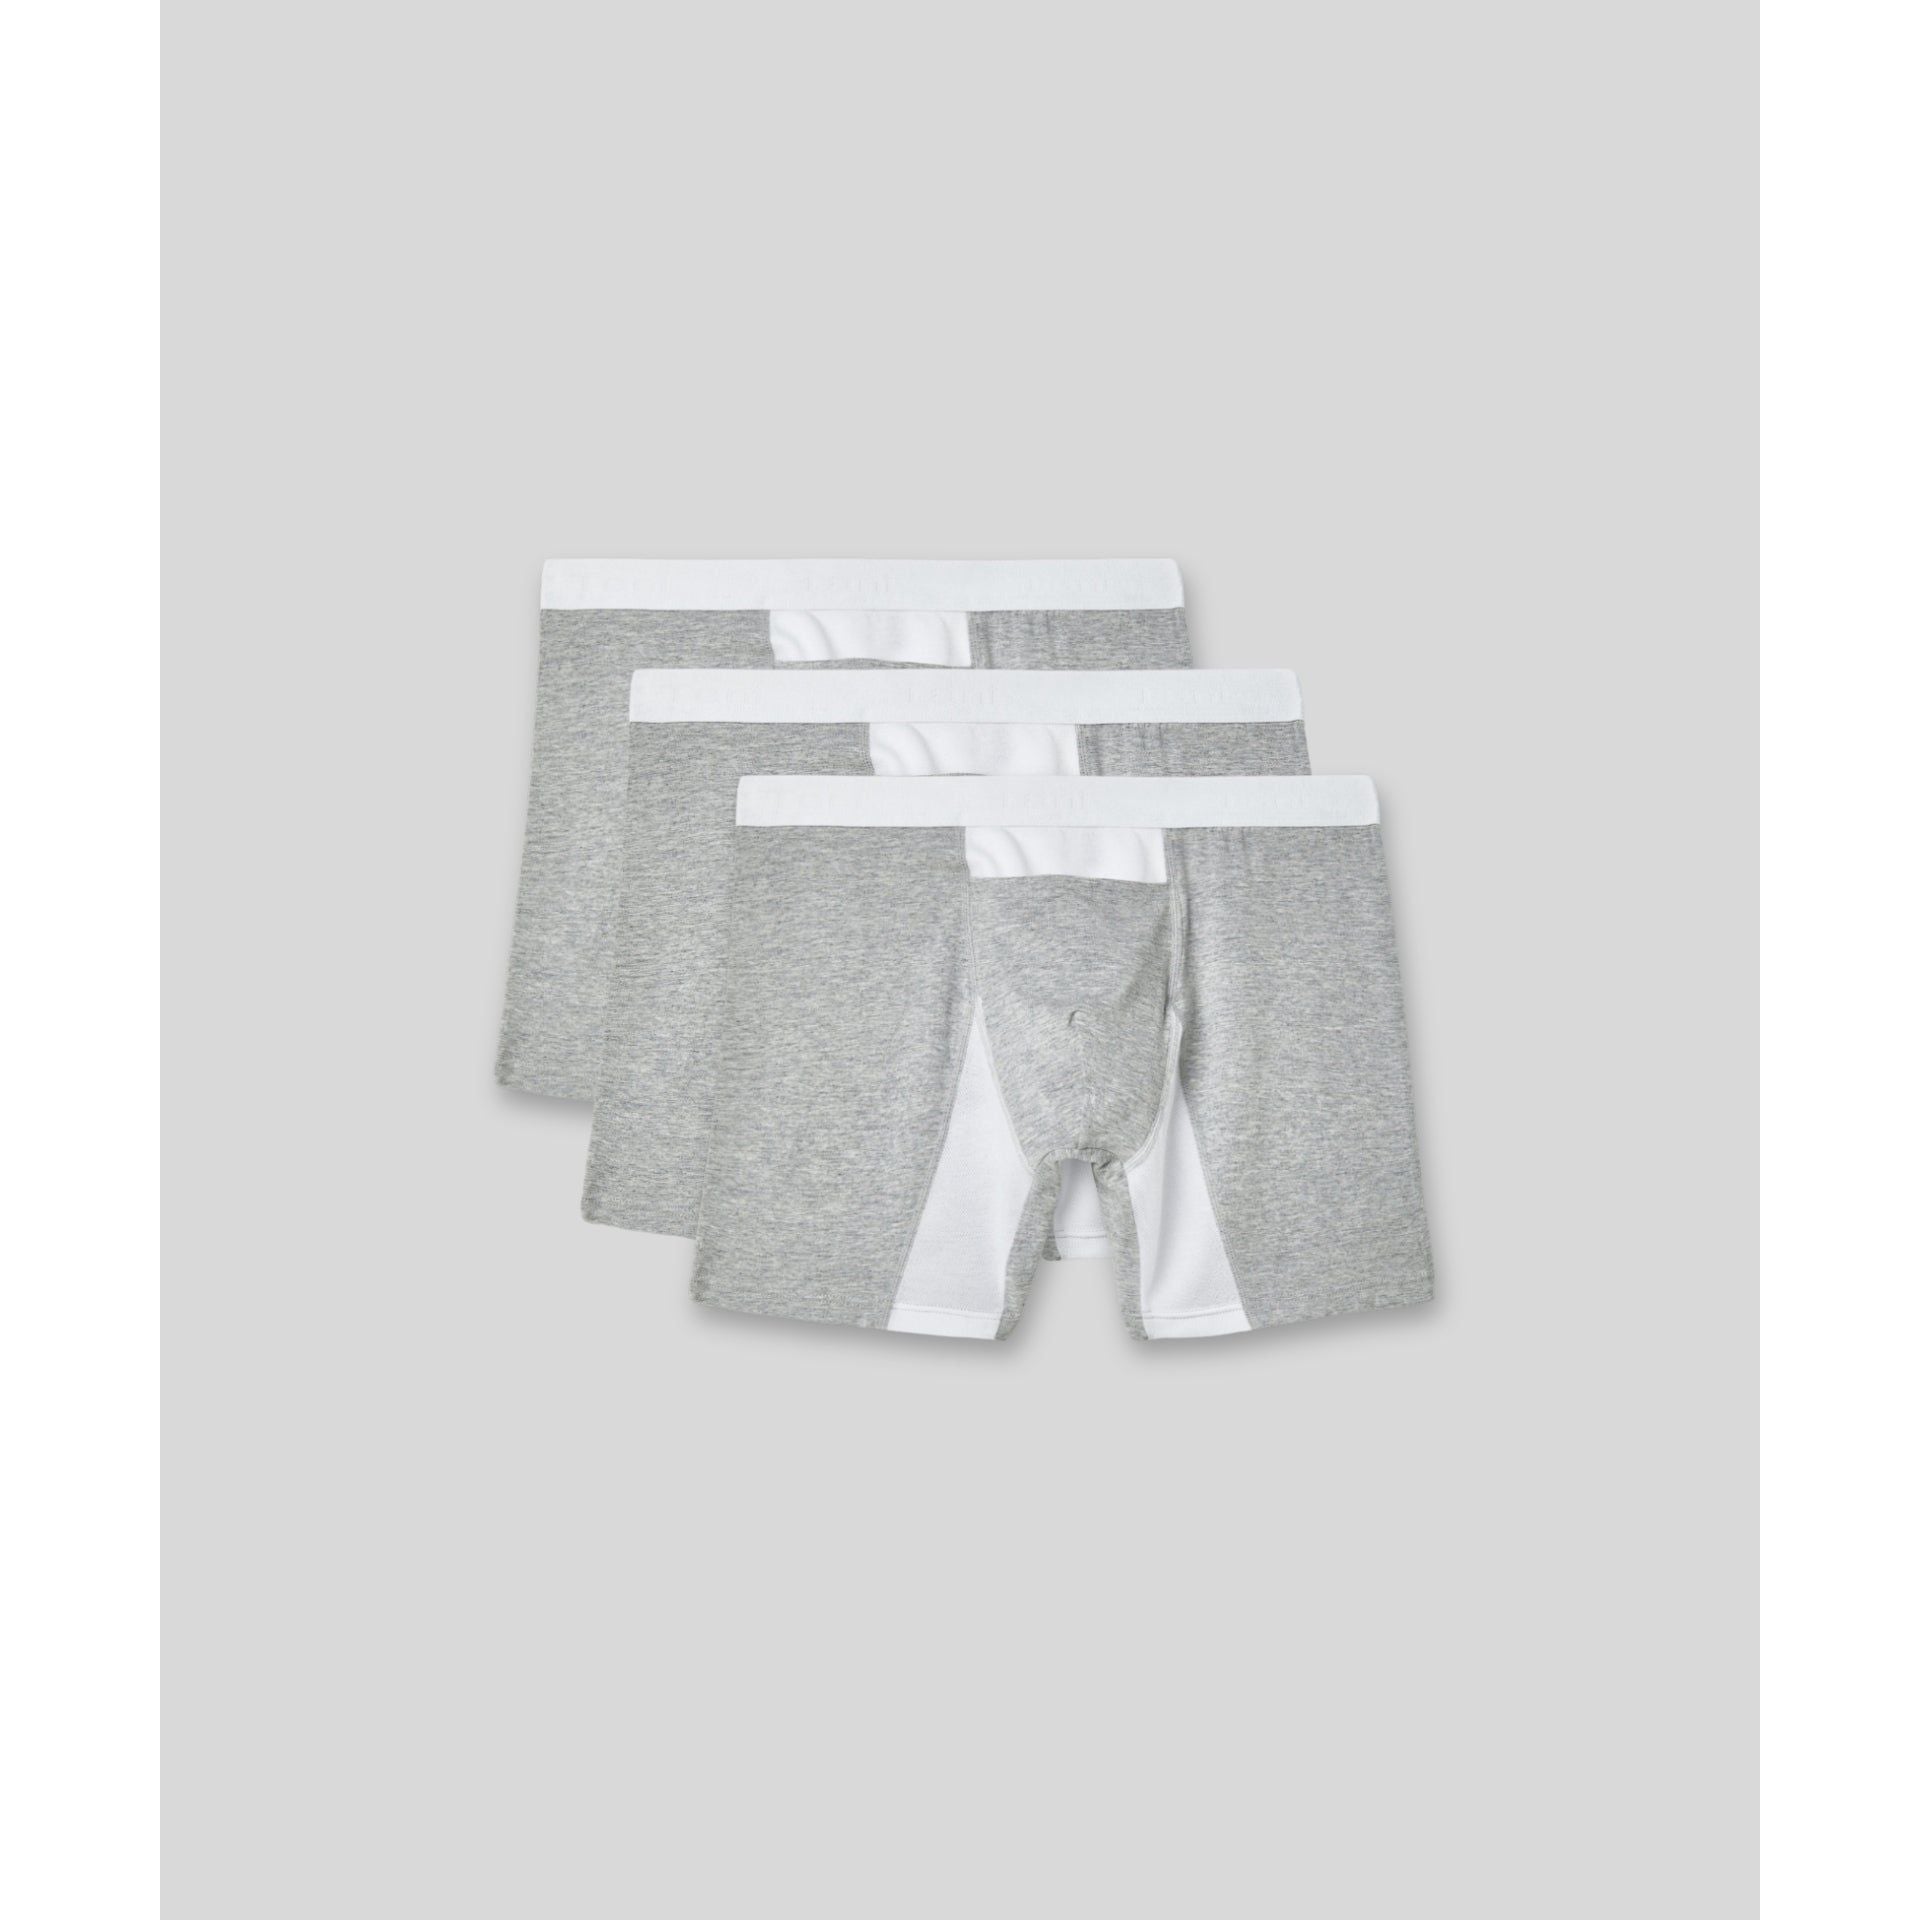 Mens Boxer Brief with a Fly - 3 Pack